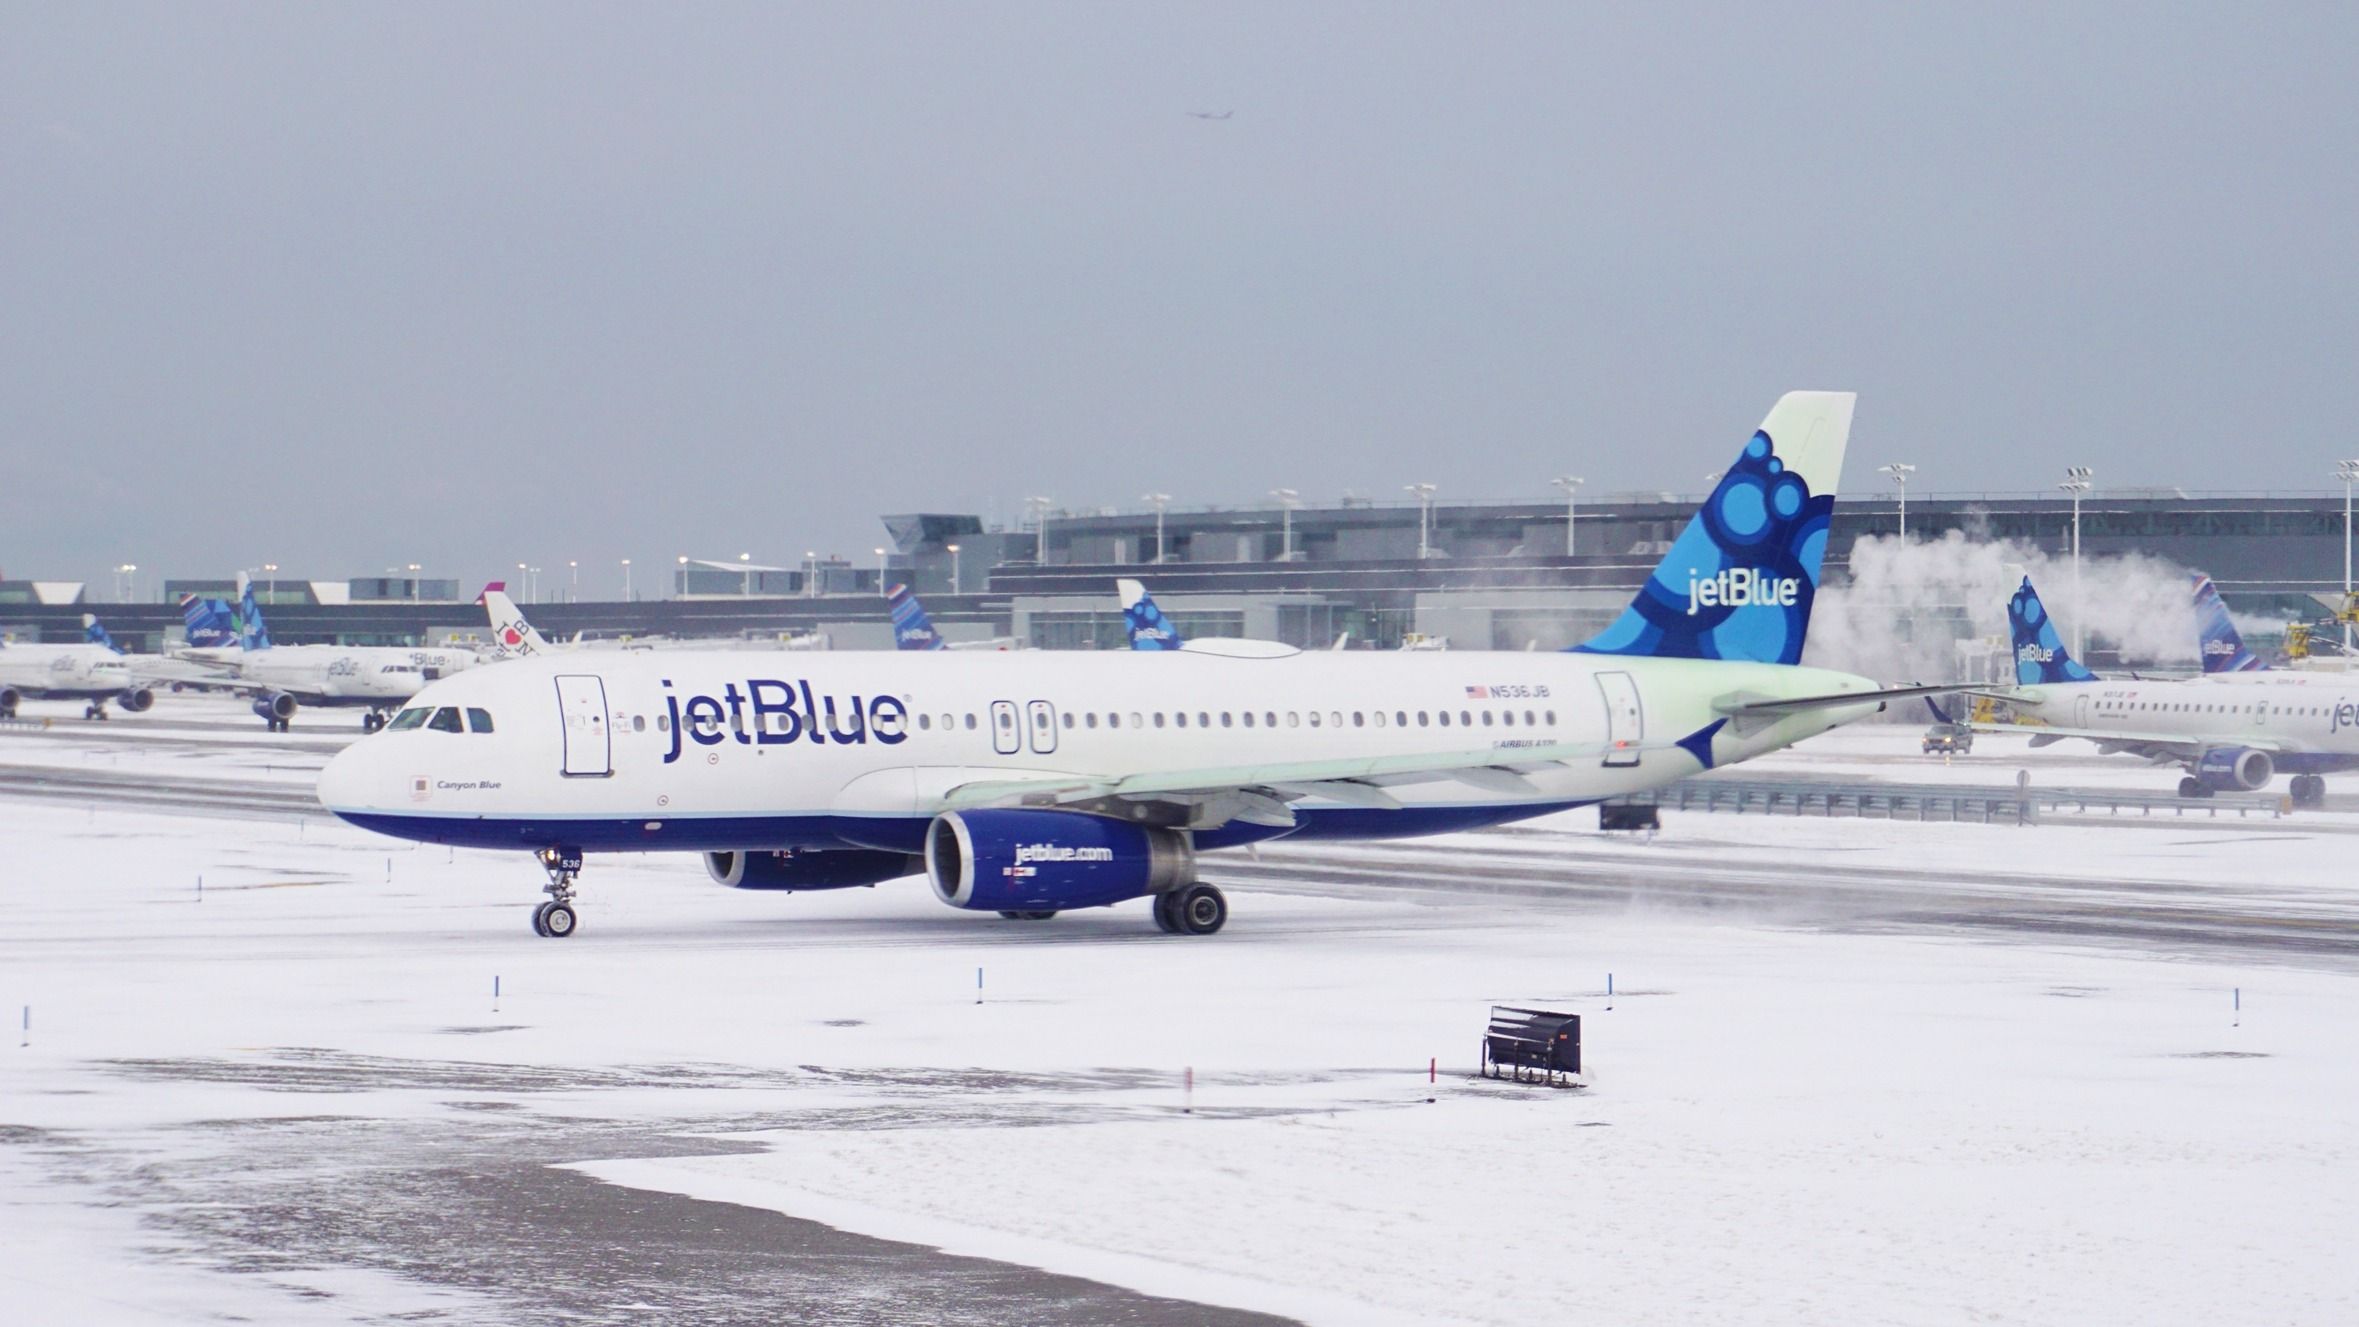 A JetBlue Airbus A320 on a wintery snowy airport apron.